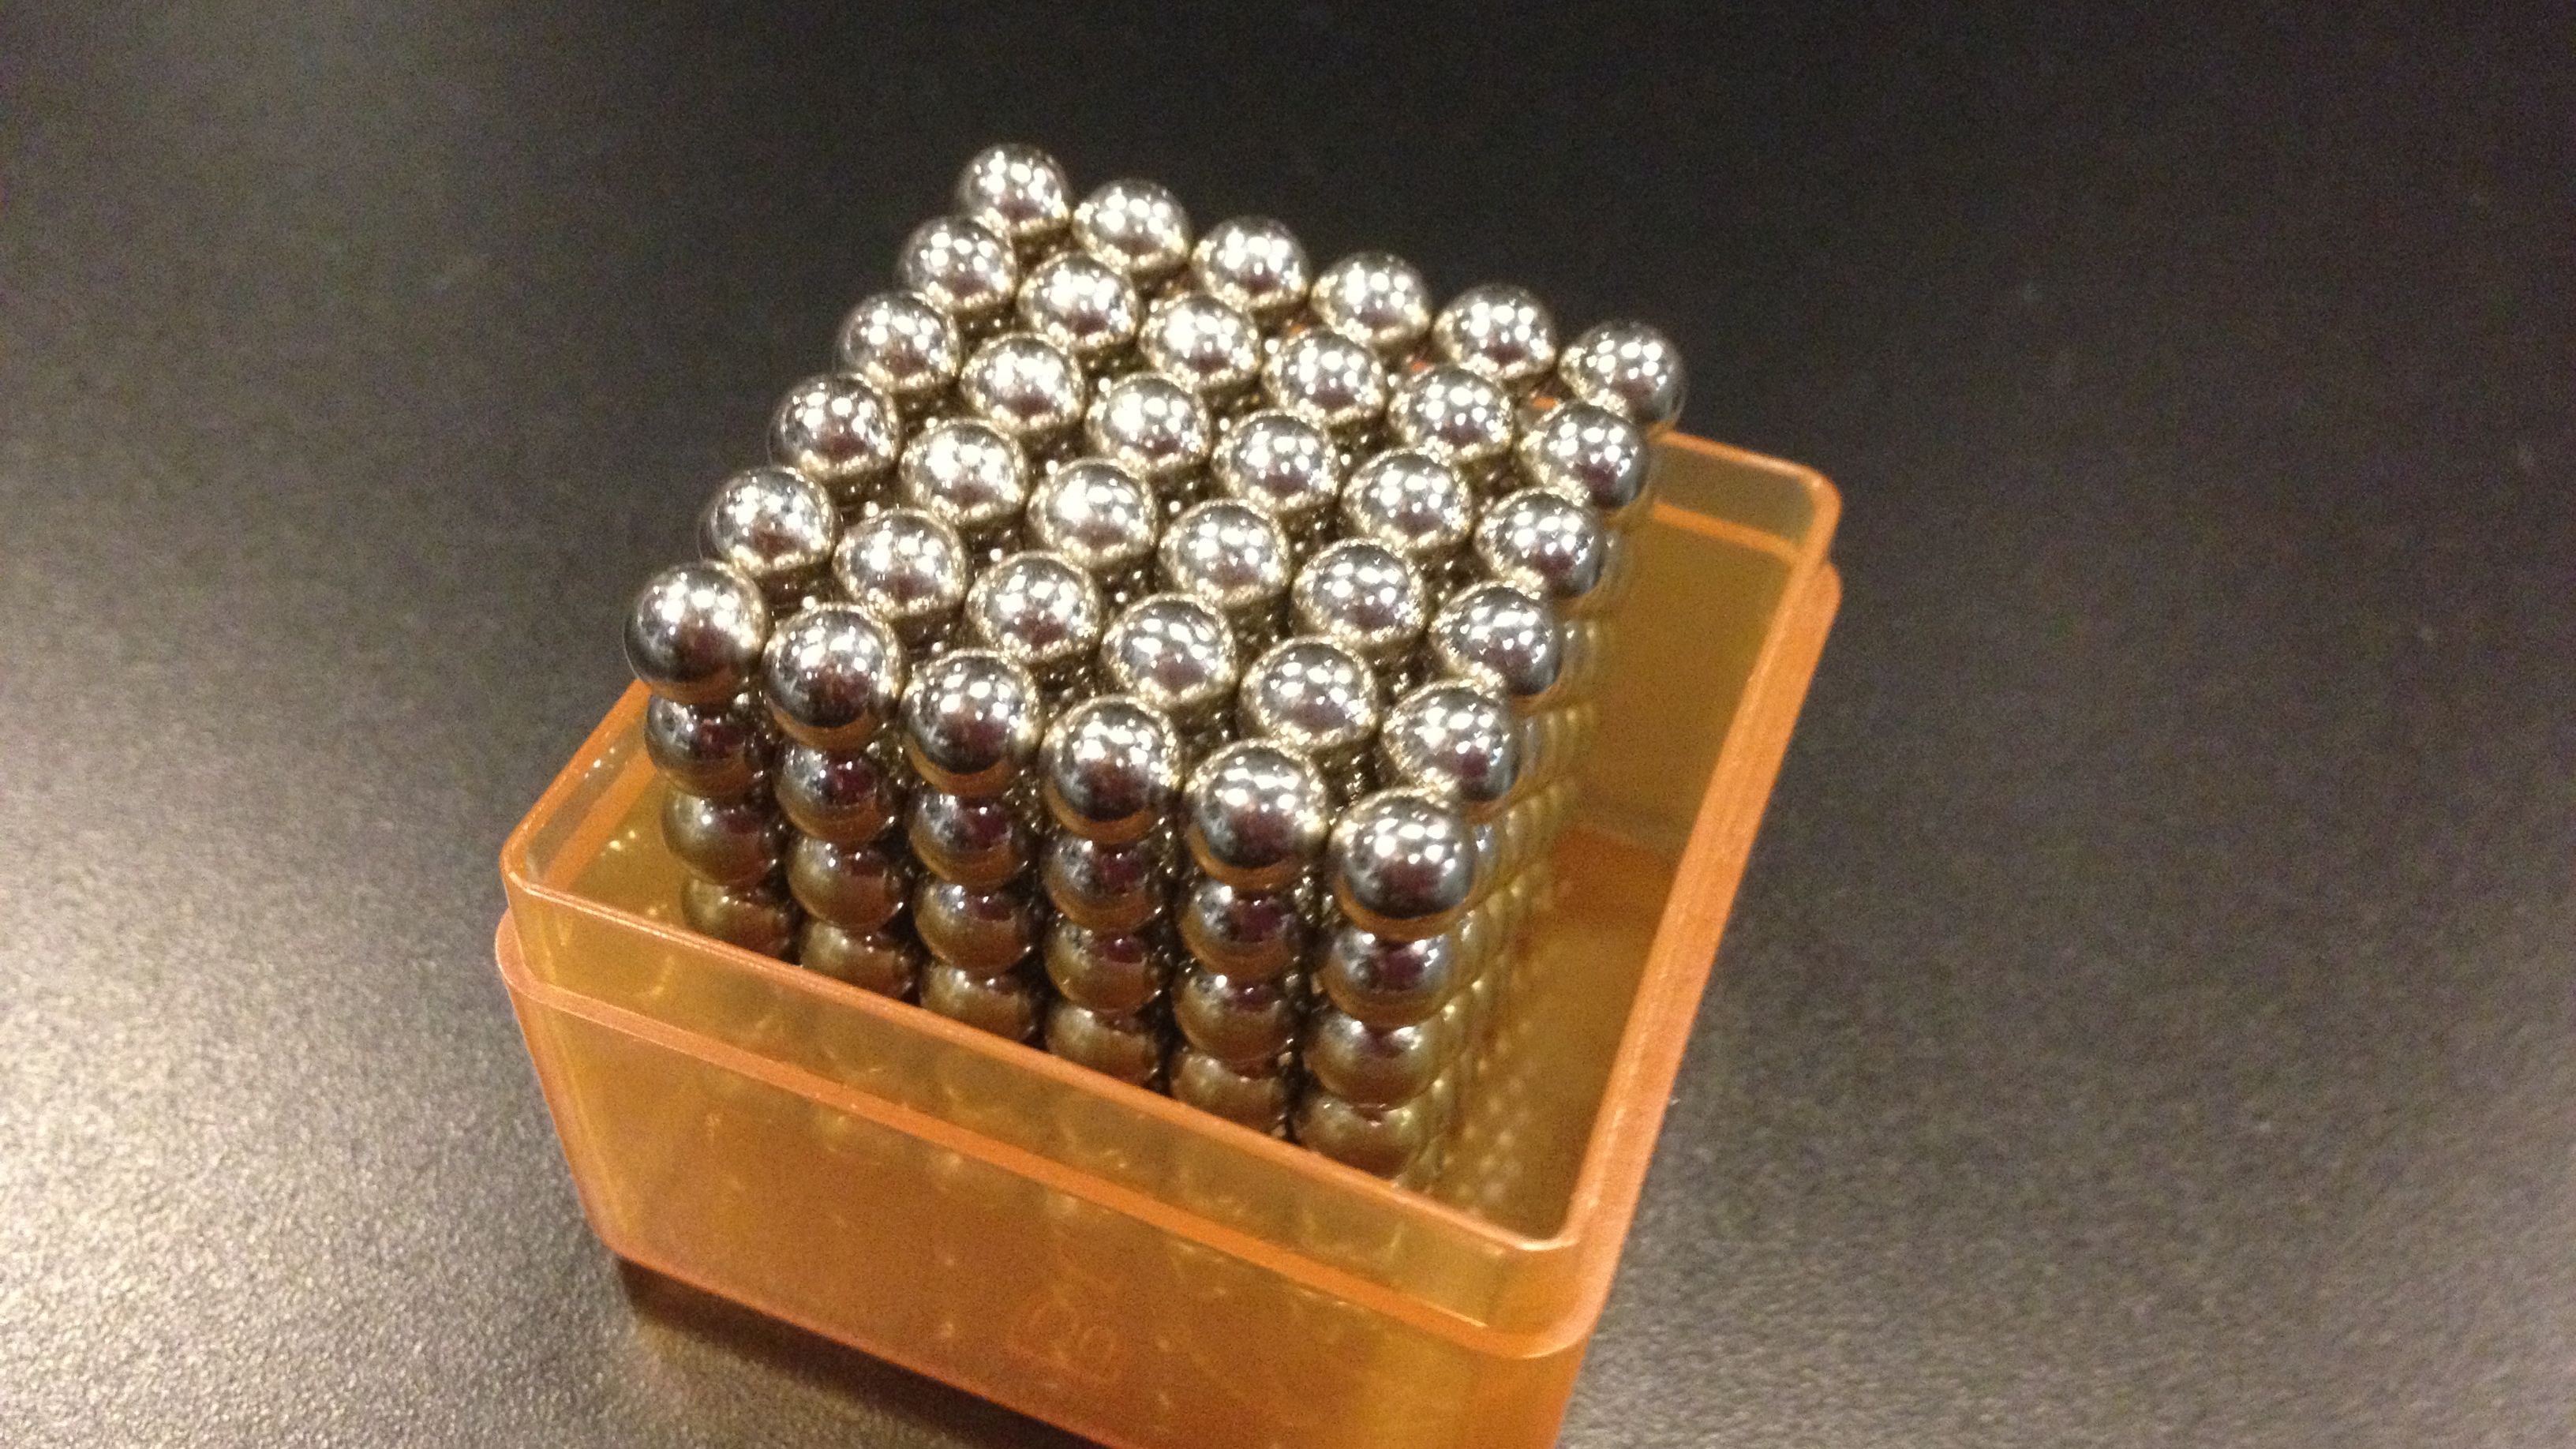 Buckyballs are a  'desk toy' made up of many small magnets.